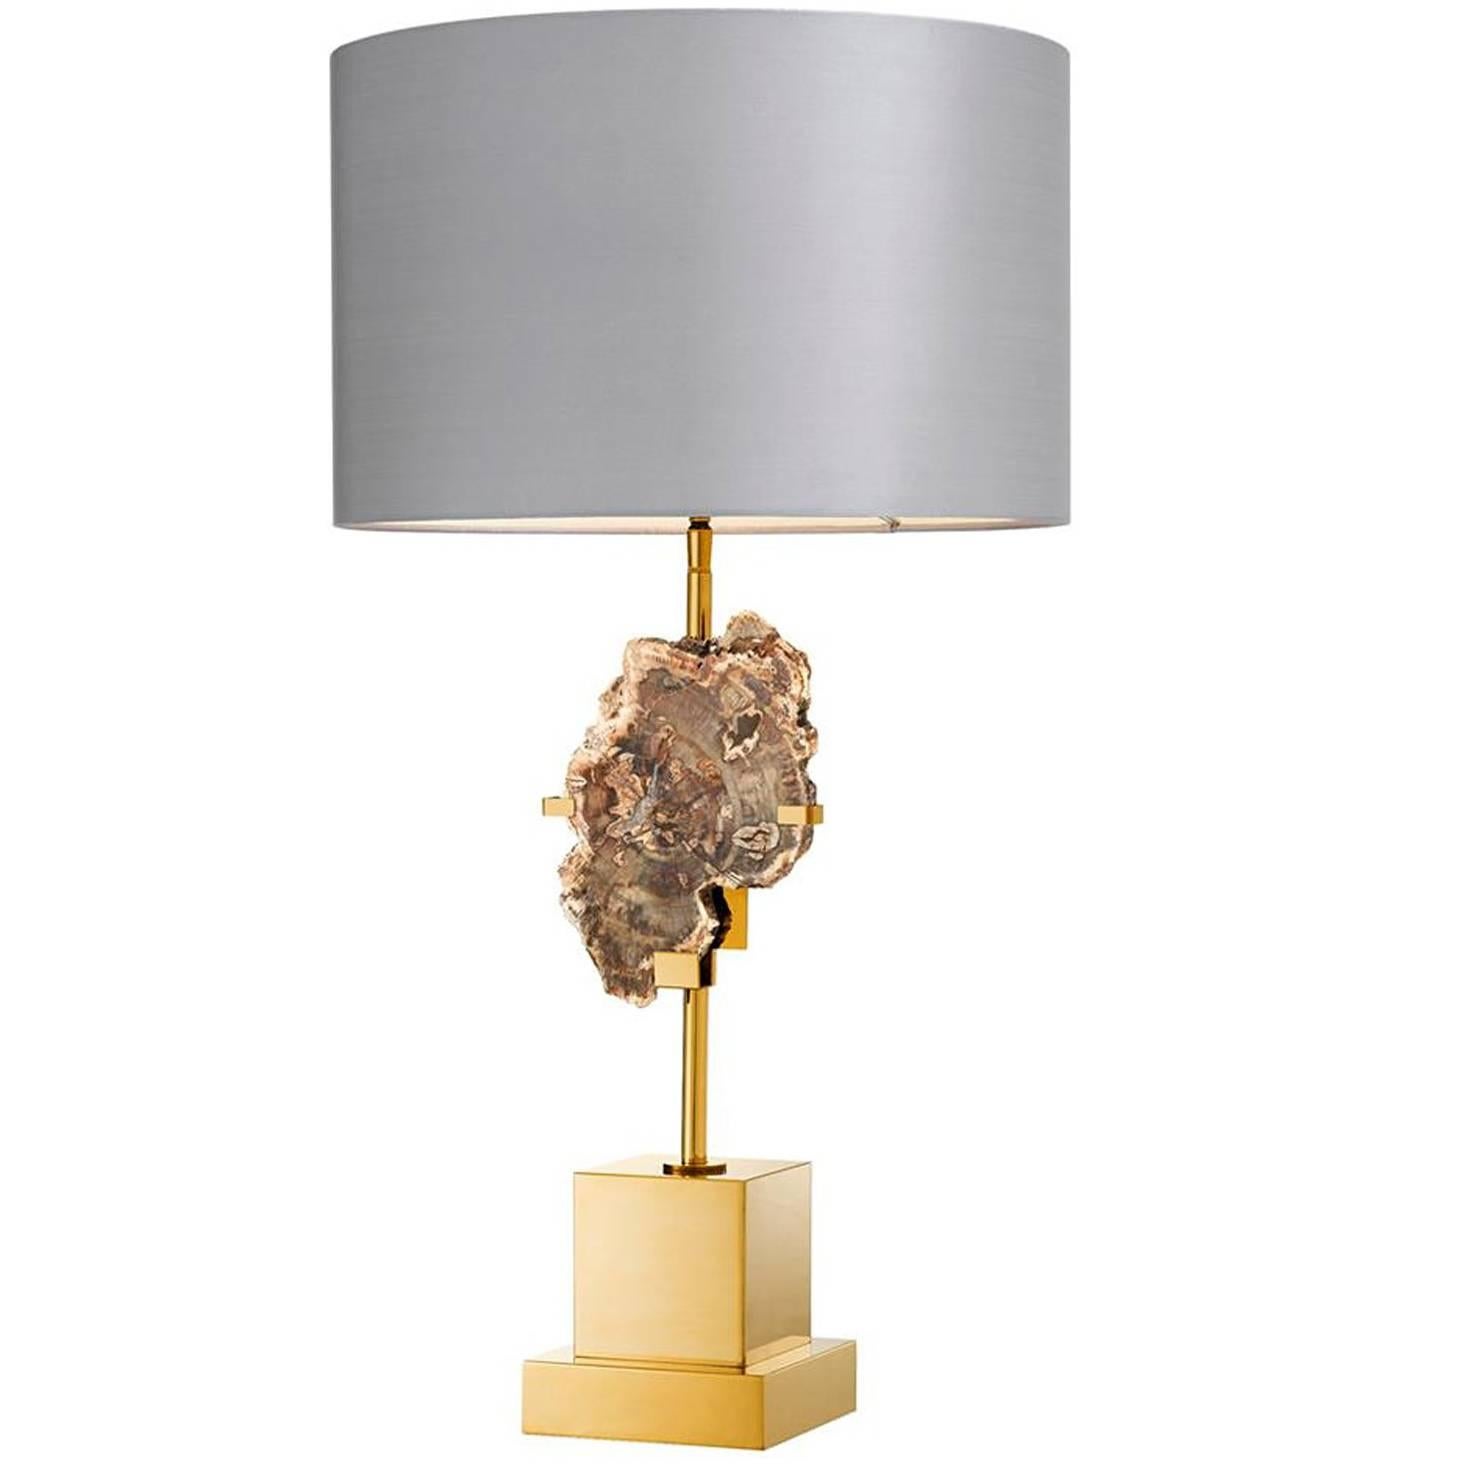 Dominus Table Lamp in Gold Finish with Petrified Wood